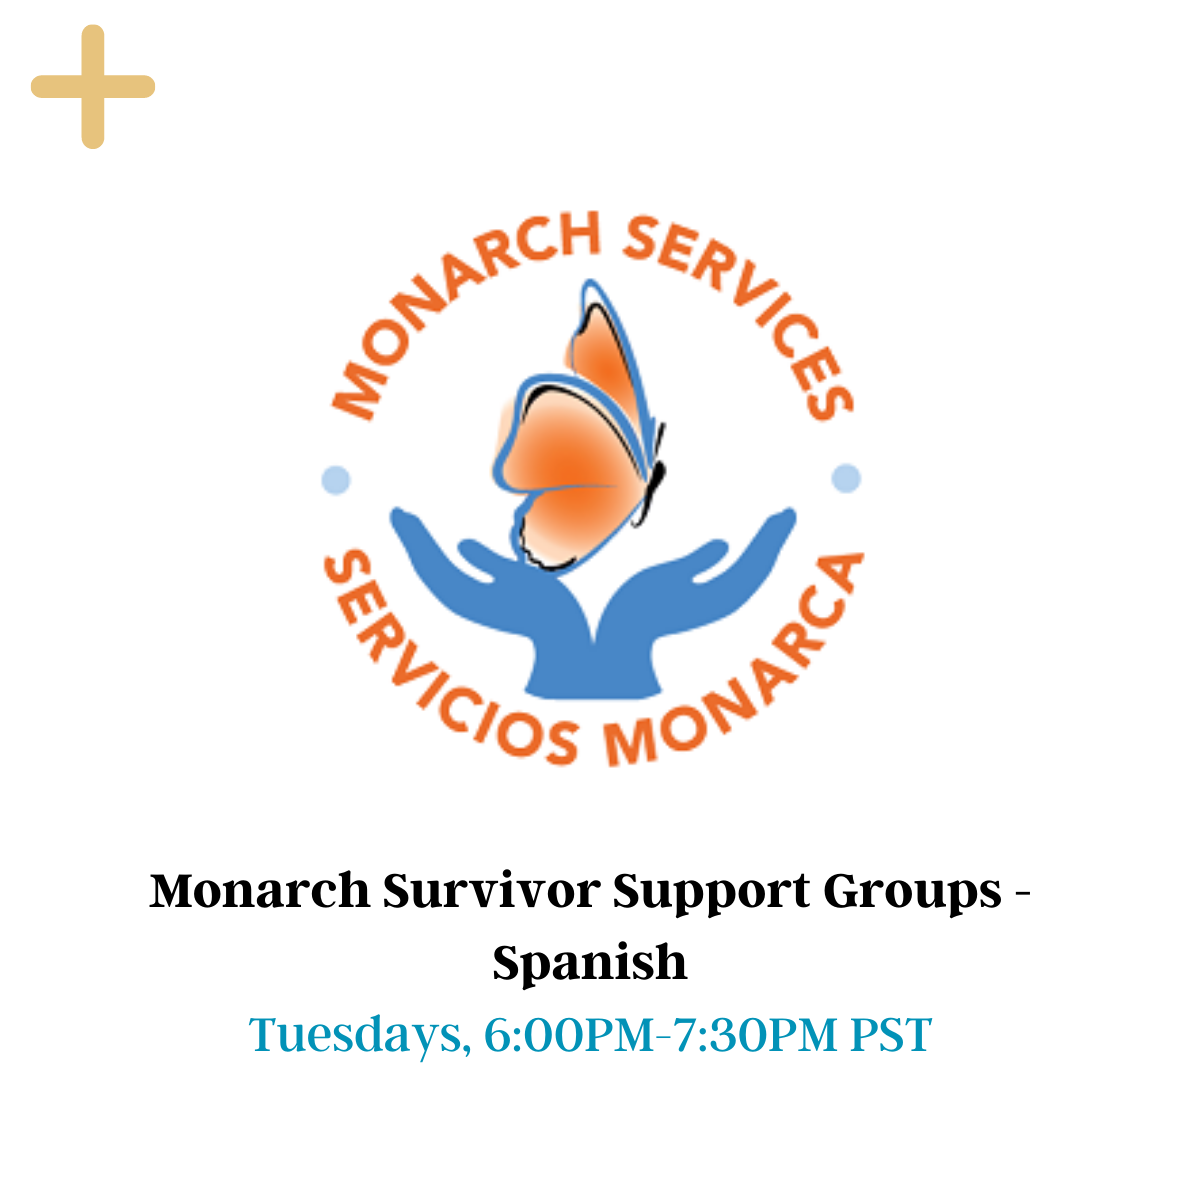 Monarch Survivor Support Groups - Spanish cover page with the Monarch Services logo (an orange butterfly in between blue hands). The yellow button on the top can be clicked and will provide more information. The picture has date at the bottom: Tuesdays, 6:00 PM – 7:30 PM